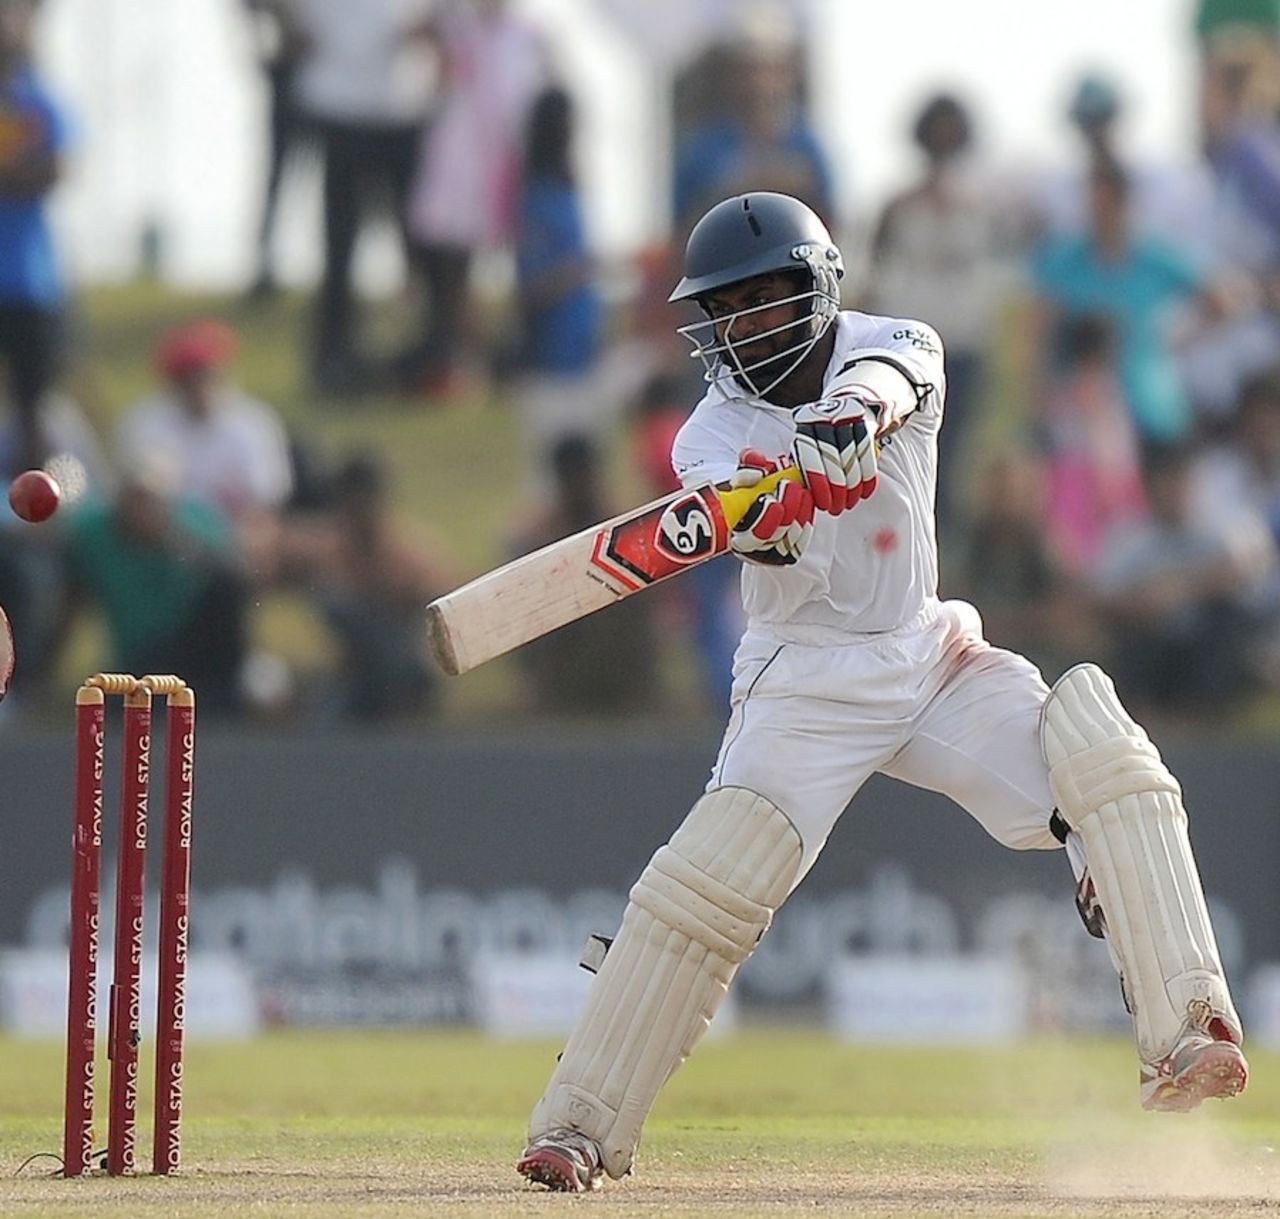 Kaushal Silva cuts one of the back foot, Sri Lanka v South Africa, 1st Test, Galle, 4th day, July 19, 2014